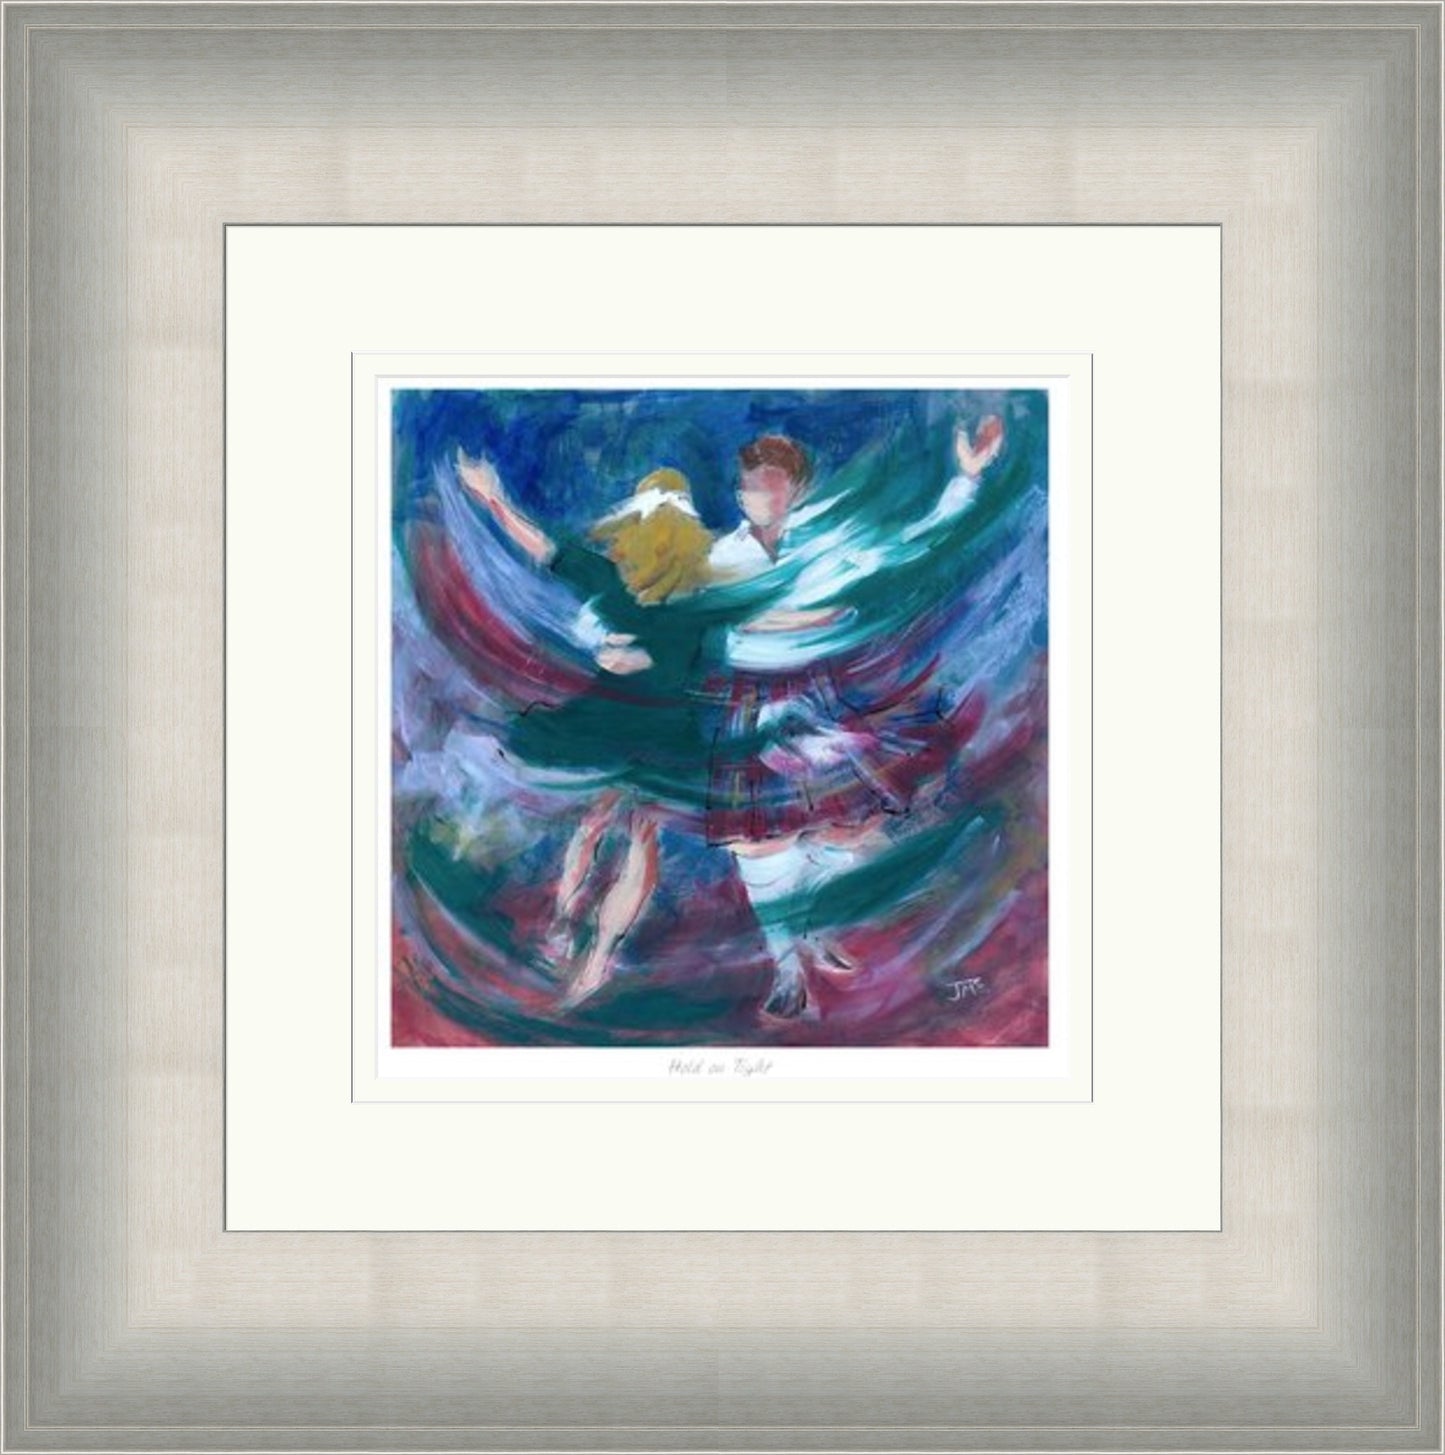 Hold on Tight Ceilidh Dancing Art Print by Janet McCrorie